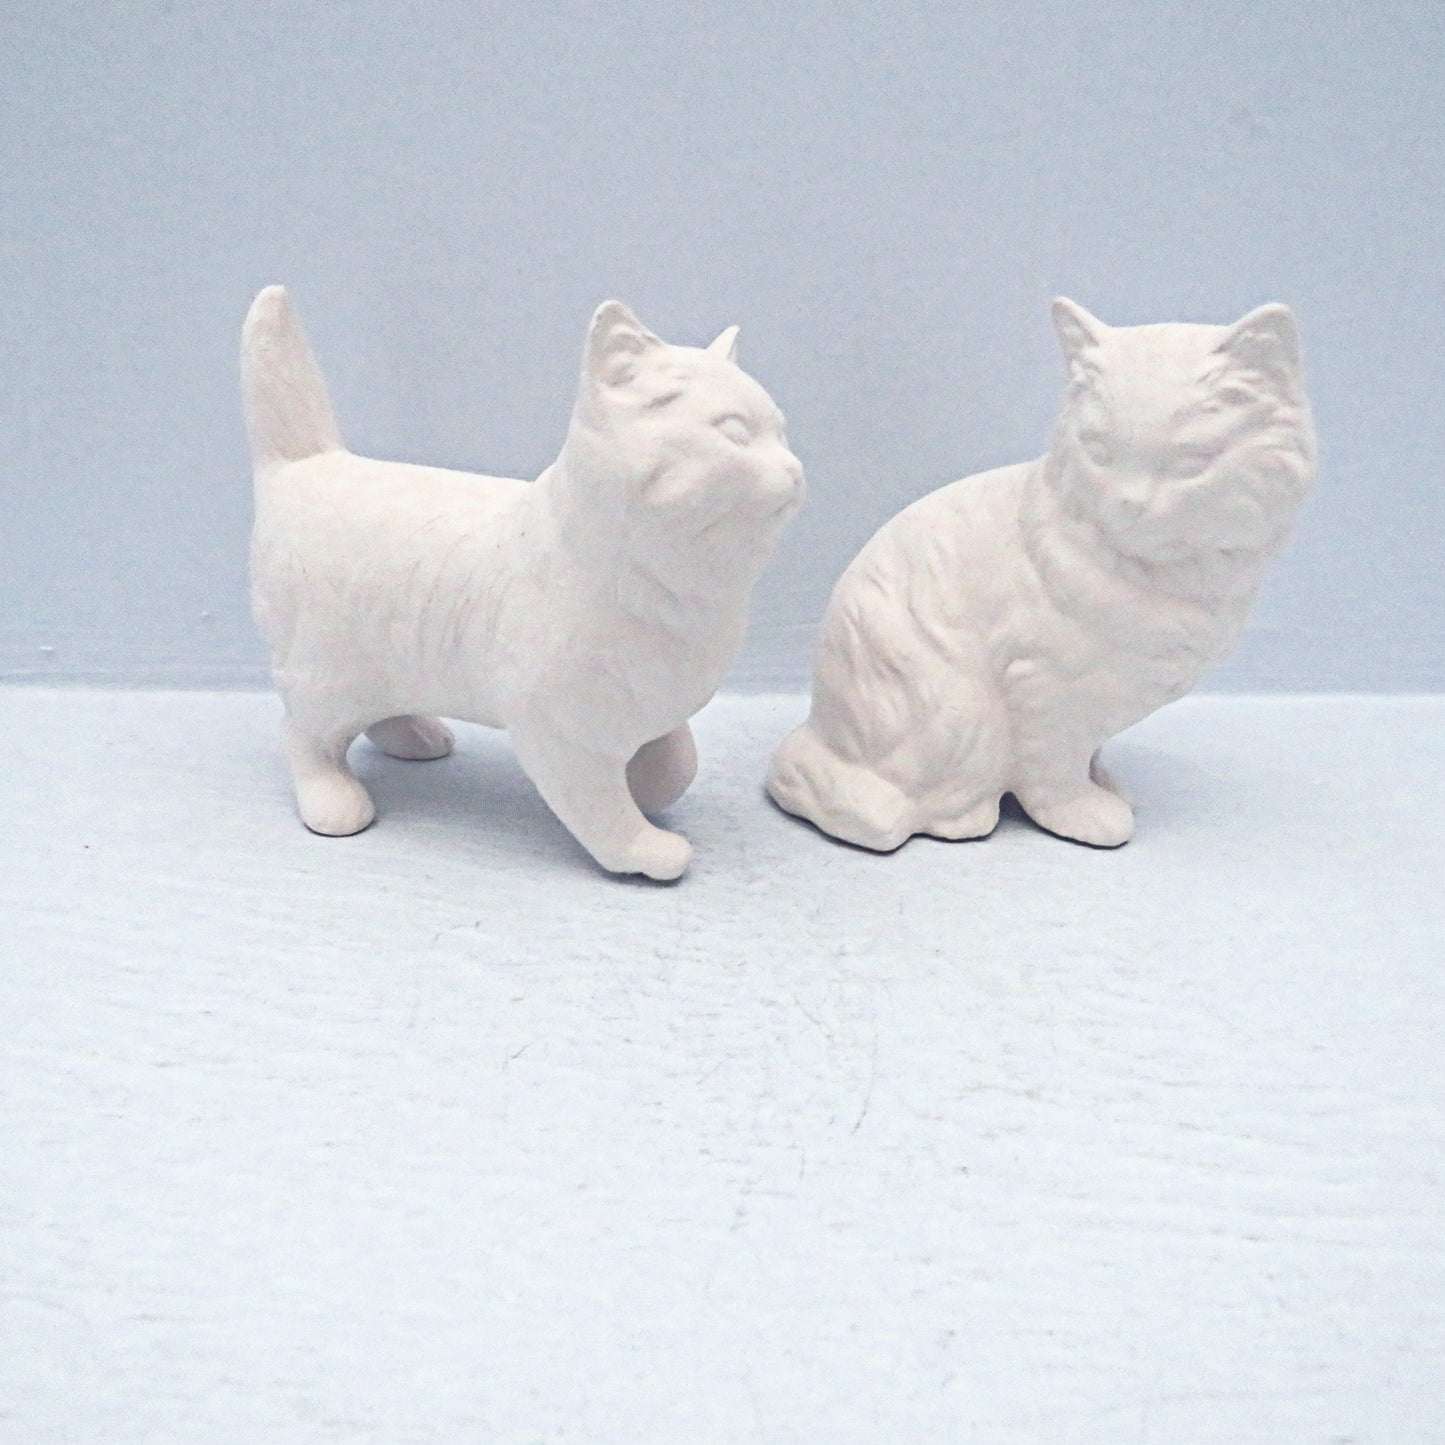 2 ready to paint ceramic cat figurines.  The one on the left is standng and  facing  the right.  The one on the left is sitting with its  body toward the right, and its head facing the camera  The standing cat has its tail pointing up.  They are on a pale blue surface.